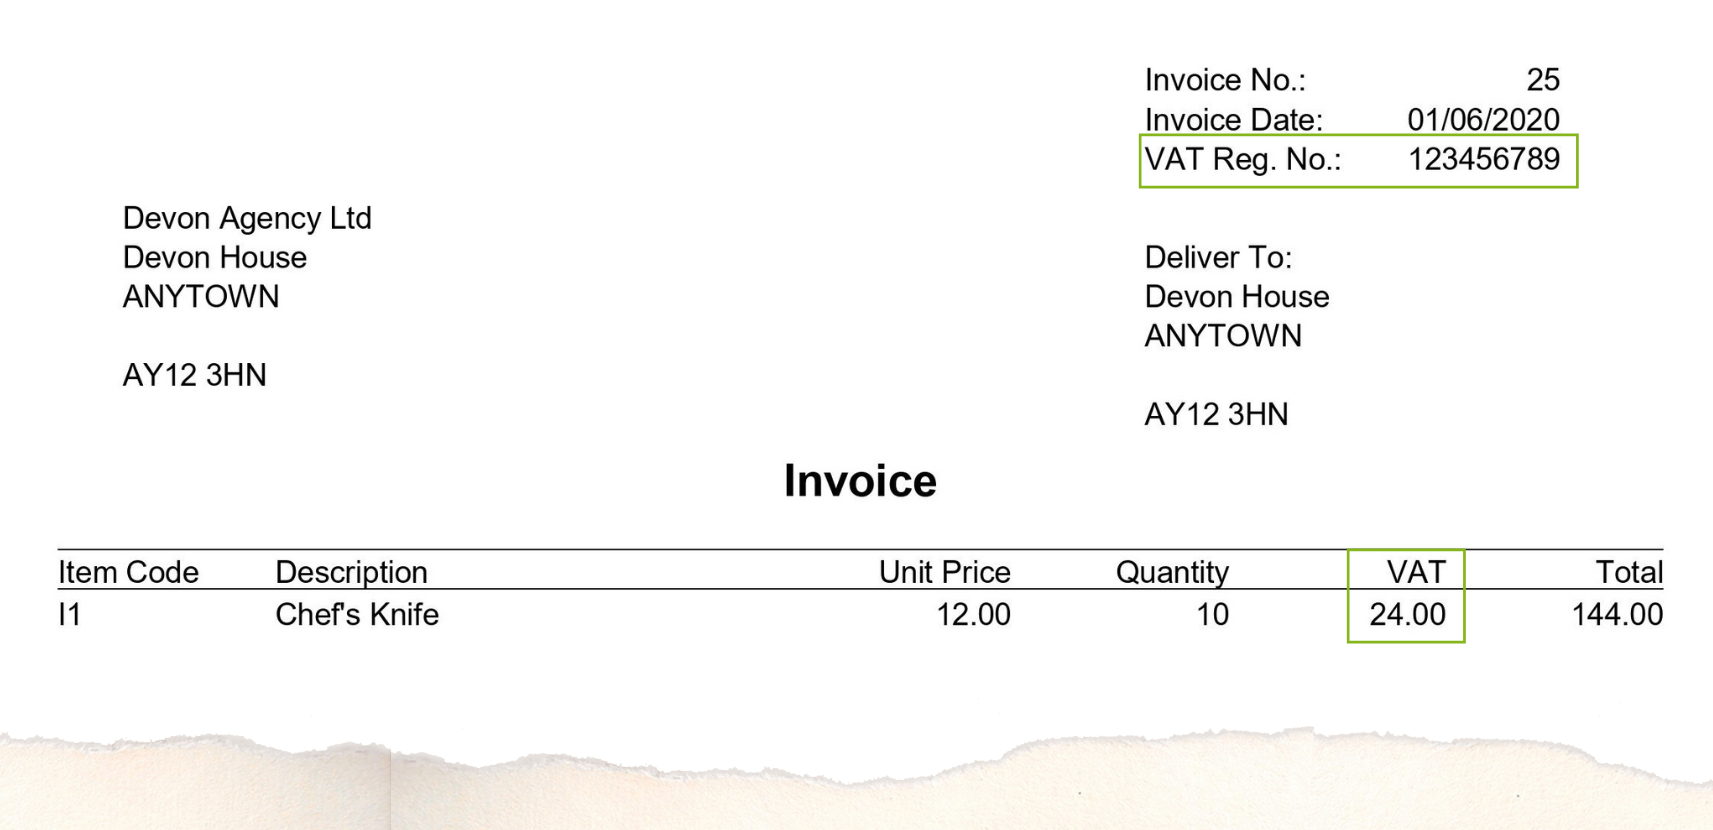 An example of an invoice template that includes VAT